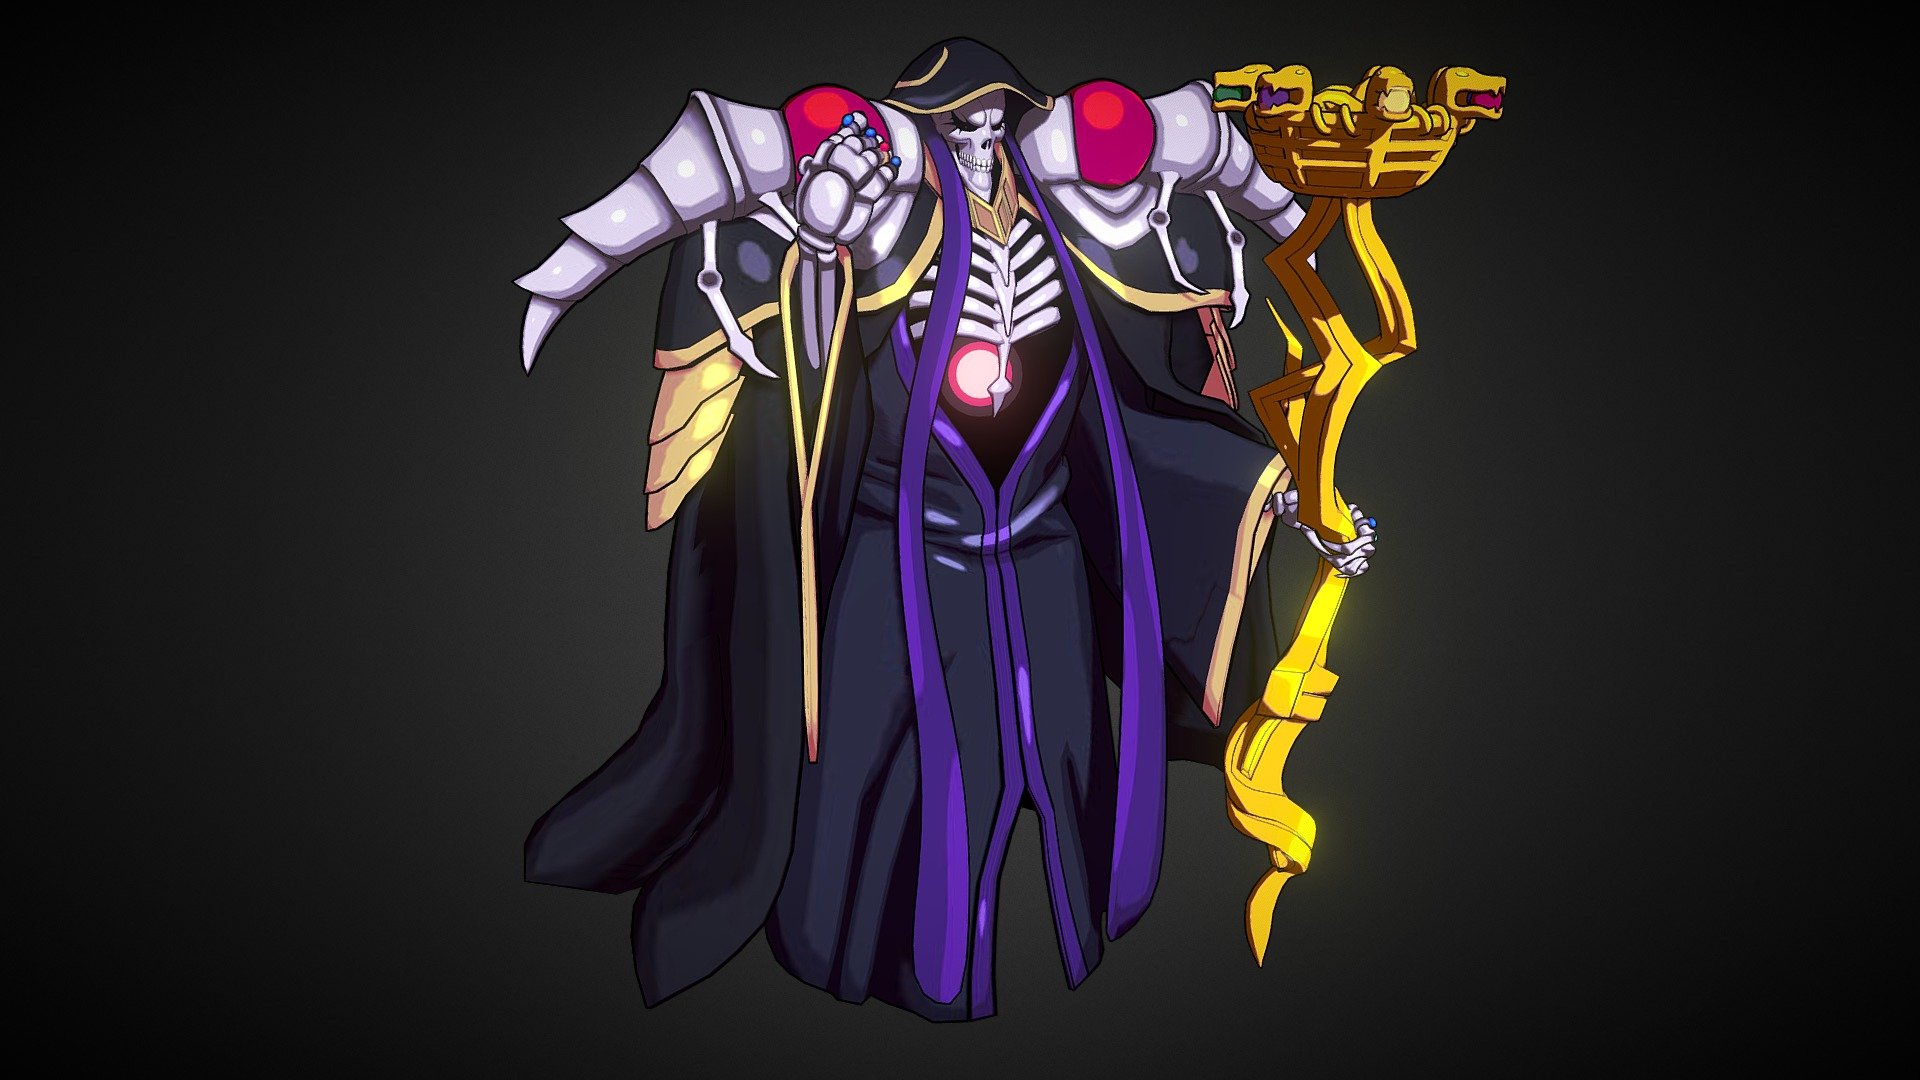 Custom Shadow and Specular


Ainz Ooal Gown from Overlord

Original Art by -



So-Bin (Novel Illustration), 
Hugin Miyama (Manga)

Created with Blender and Krita - Overlord - Ainz Ooal Gown - 3D model by Ed3lweiss 3d model